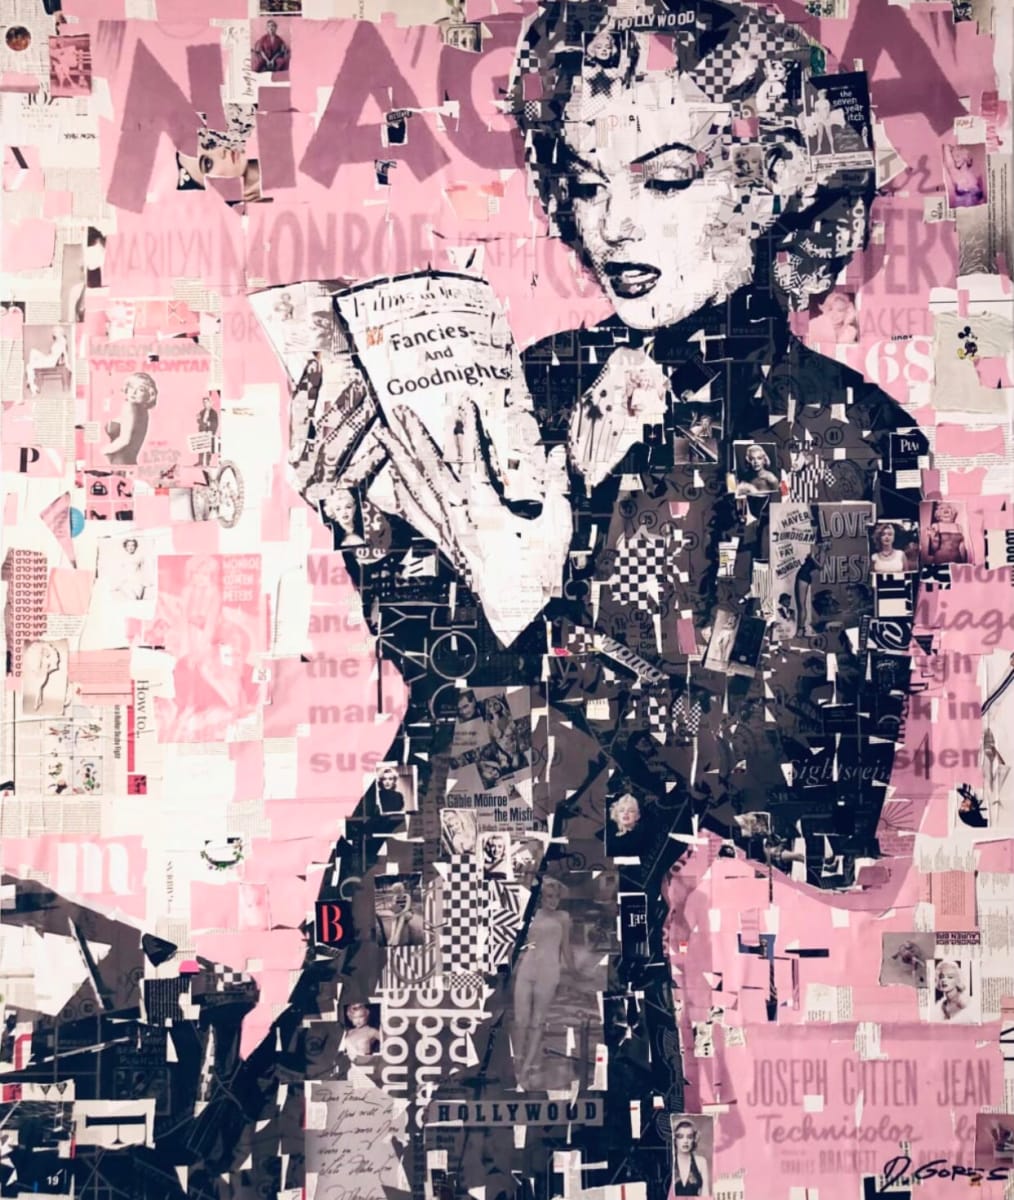 Marilyn: Fancies and Goodnights by Derek Gores by Derek Gores Gallery  Image: My third featuring Norma Jeane reading. I really hadn’t an interest in a Marilyn collage until I had the honor of visiting Hotel Bel Air, where she had her last photo shoot. Something about walking the hidden oasis made me want to look deeper at her many photographs. I came to learn she was quite a voracious reader - and this one was one of the titles in her collection. 